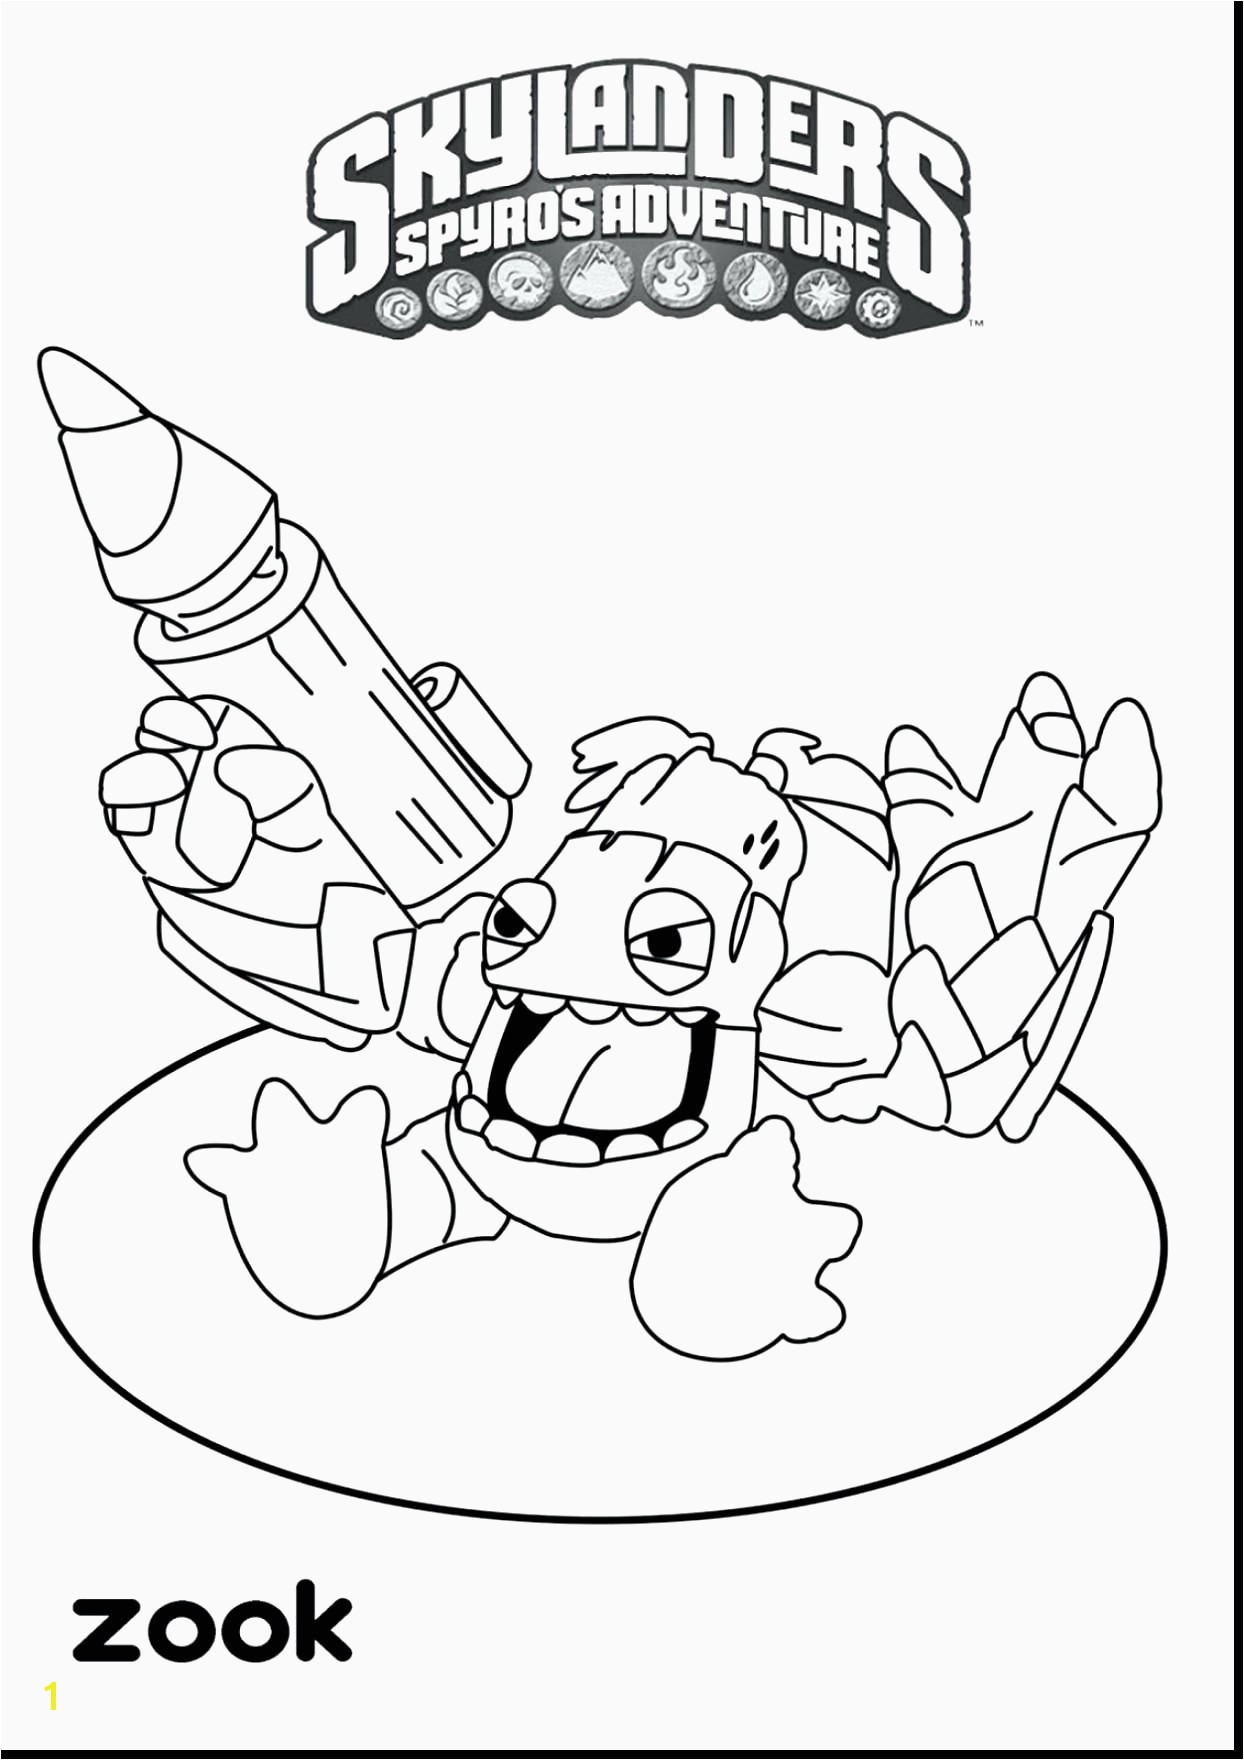 15 Best Catbug Coloring Pages